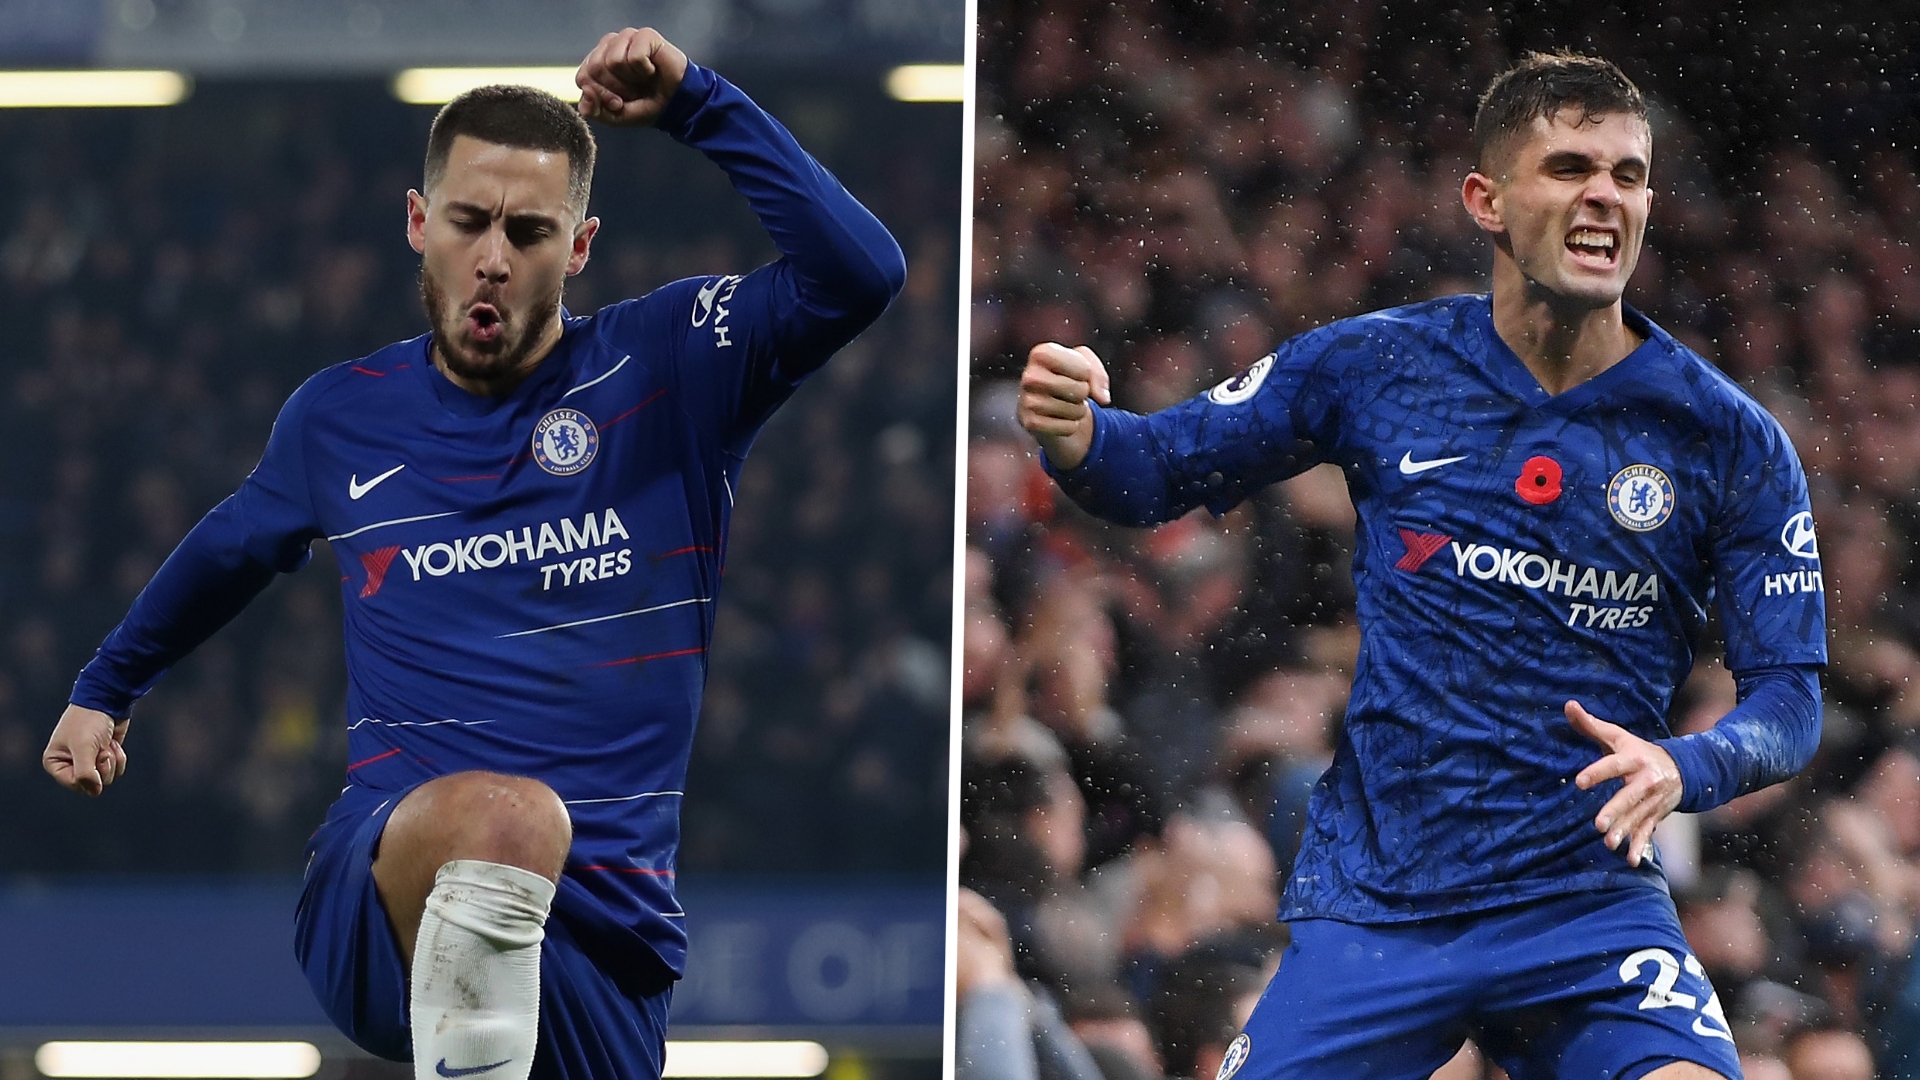 ‘Hazard has been and done it, Pulisic is potential’ – Lampard eager to avoid comparisons at Chelsea